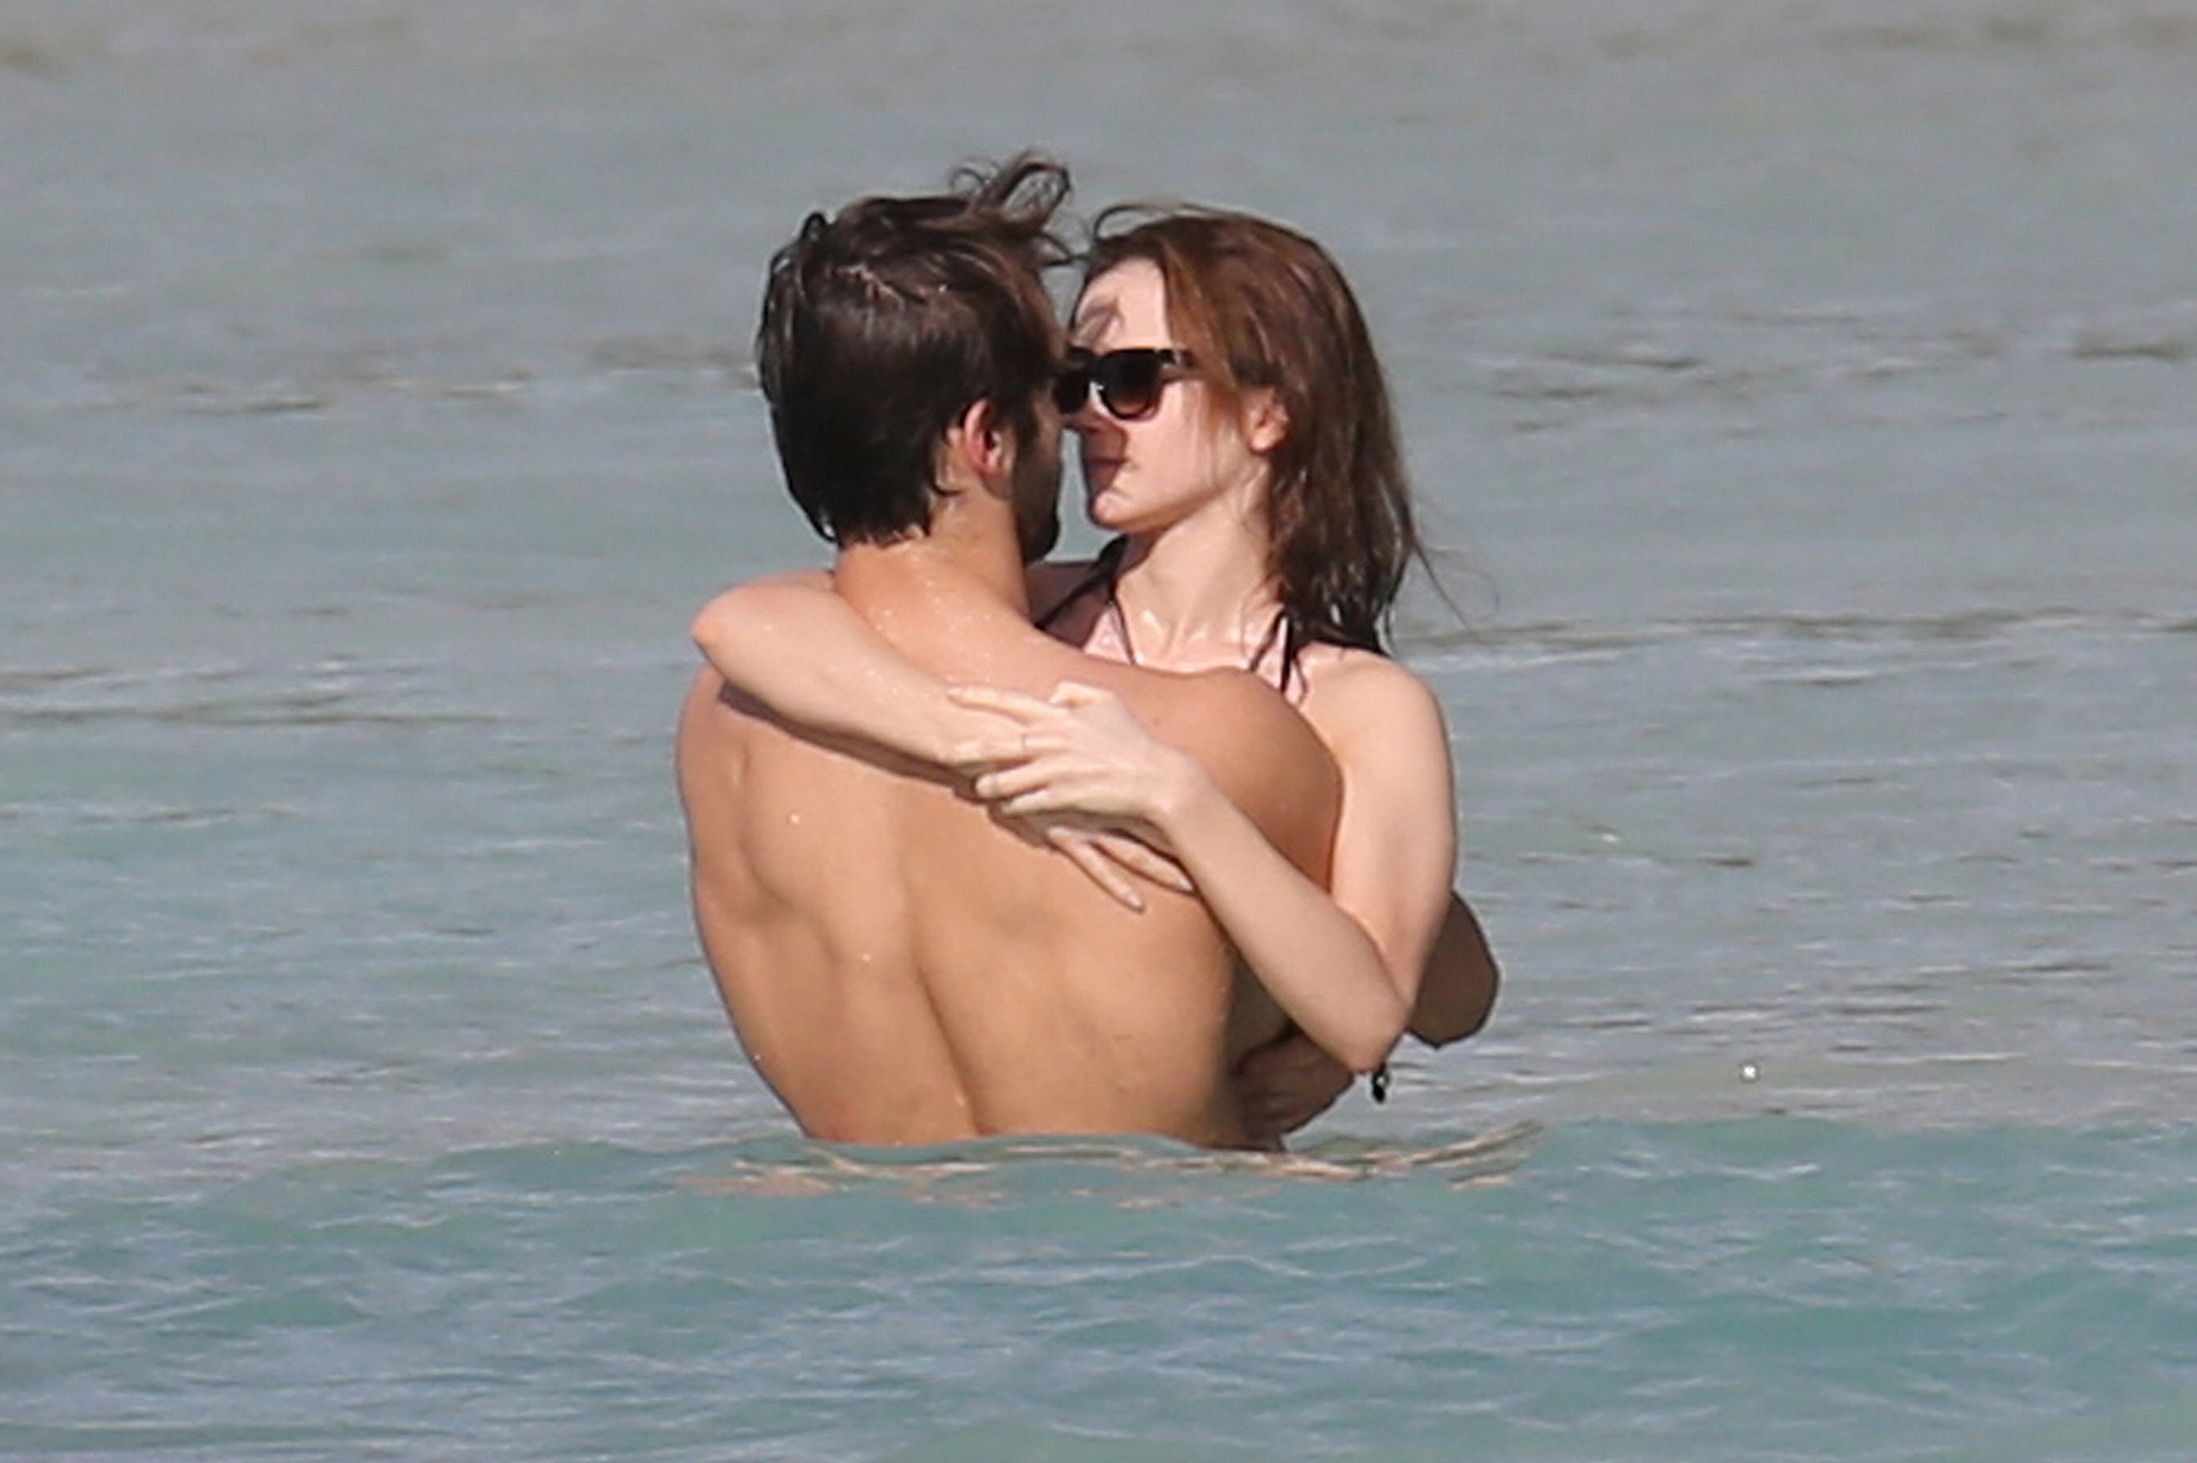 christine hoffman recommends emma watson skinny dipping pic